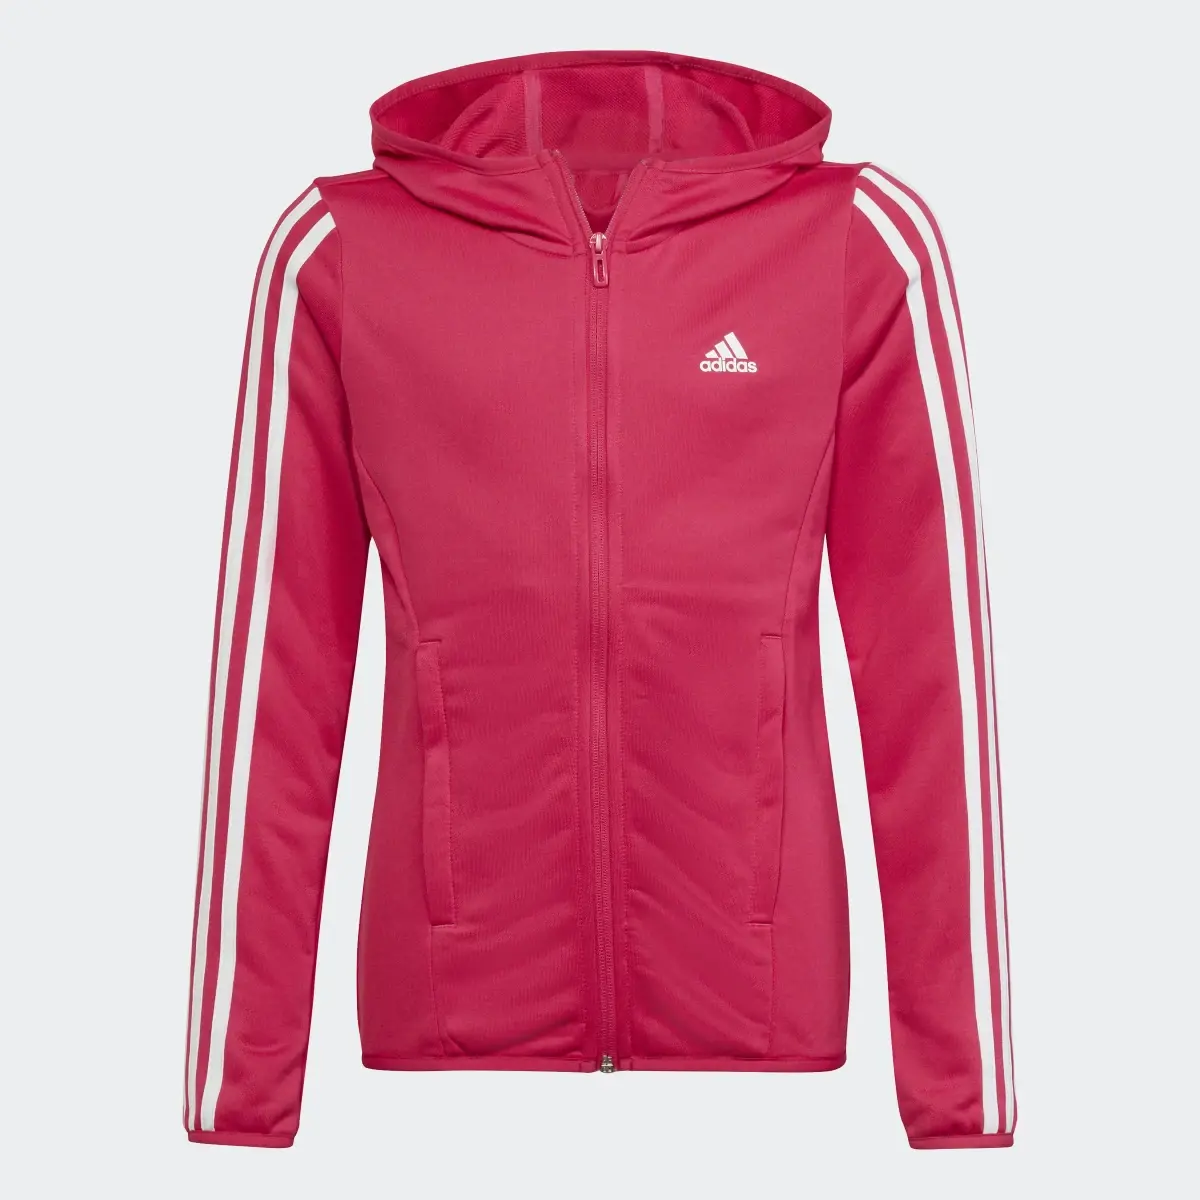 Adidas Designed To Move 3-Stripes Full-Zip Hoodie. 1